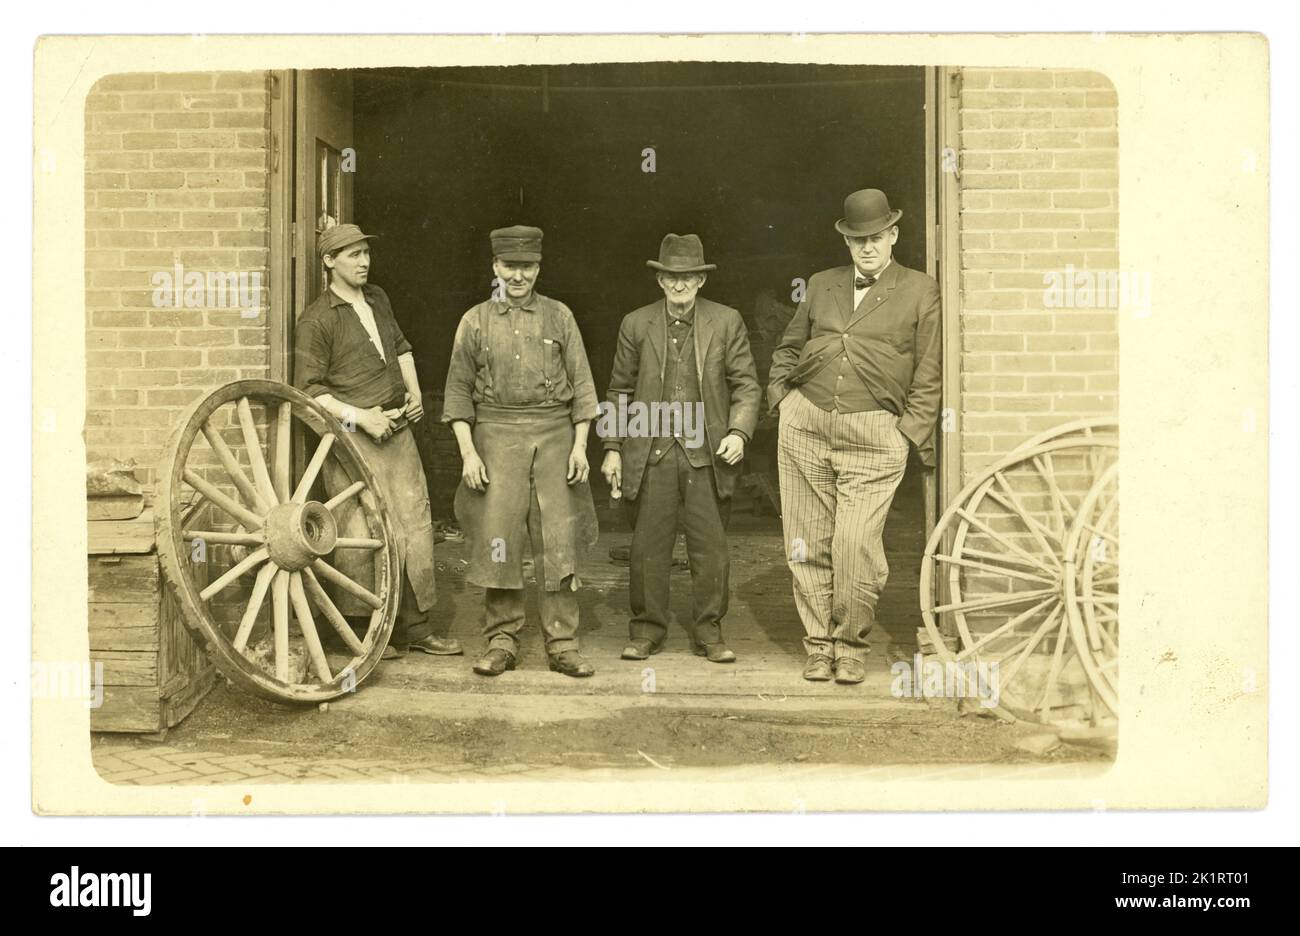 Original very clear, evocative, early 1900's American postcard of 3 wheelwrights, overseer maybe in pinstripe trousers, bowler hat, selection of other hats, with cart wheels posing for a photo portrait outside their workshop. Some amazing real characters, workwear fashions, bowler hats. Room for copy space.  U.S.A. Circa 1919 Stock Photo